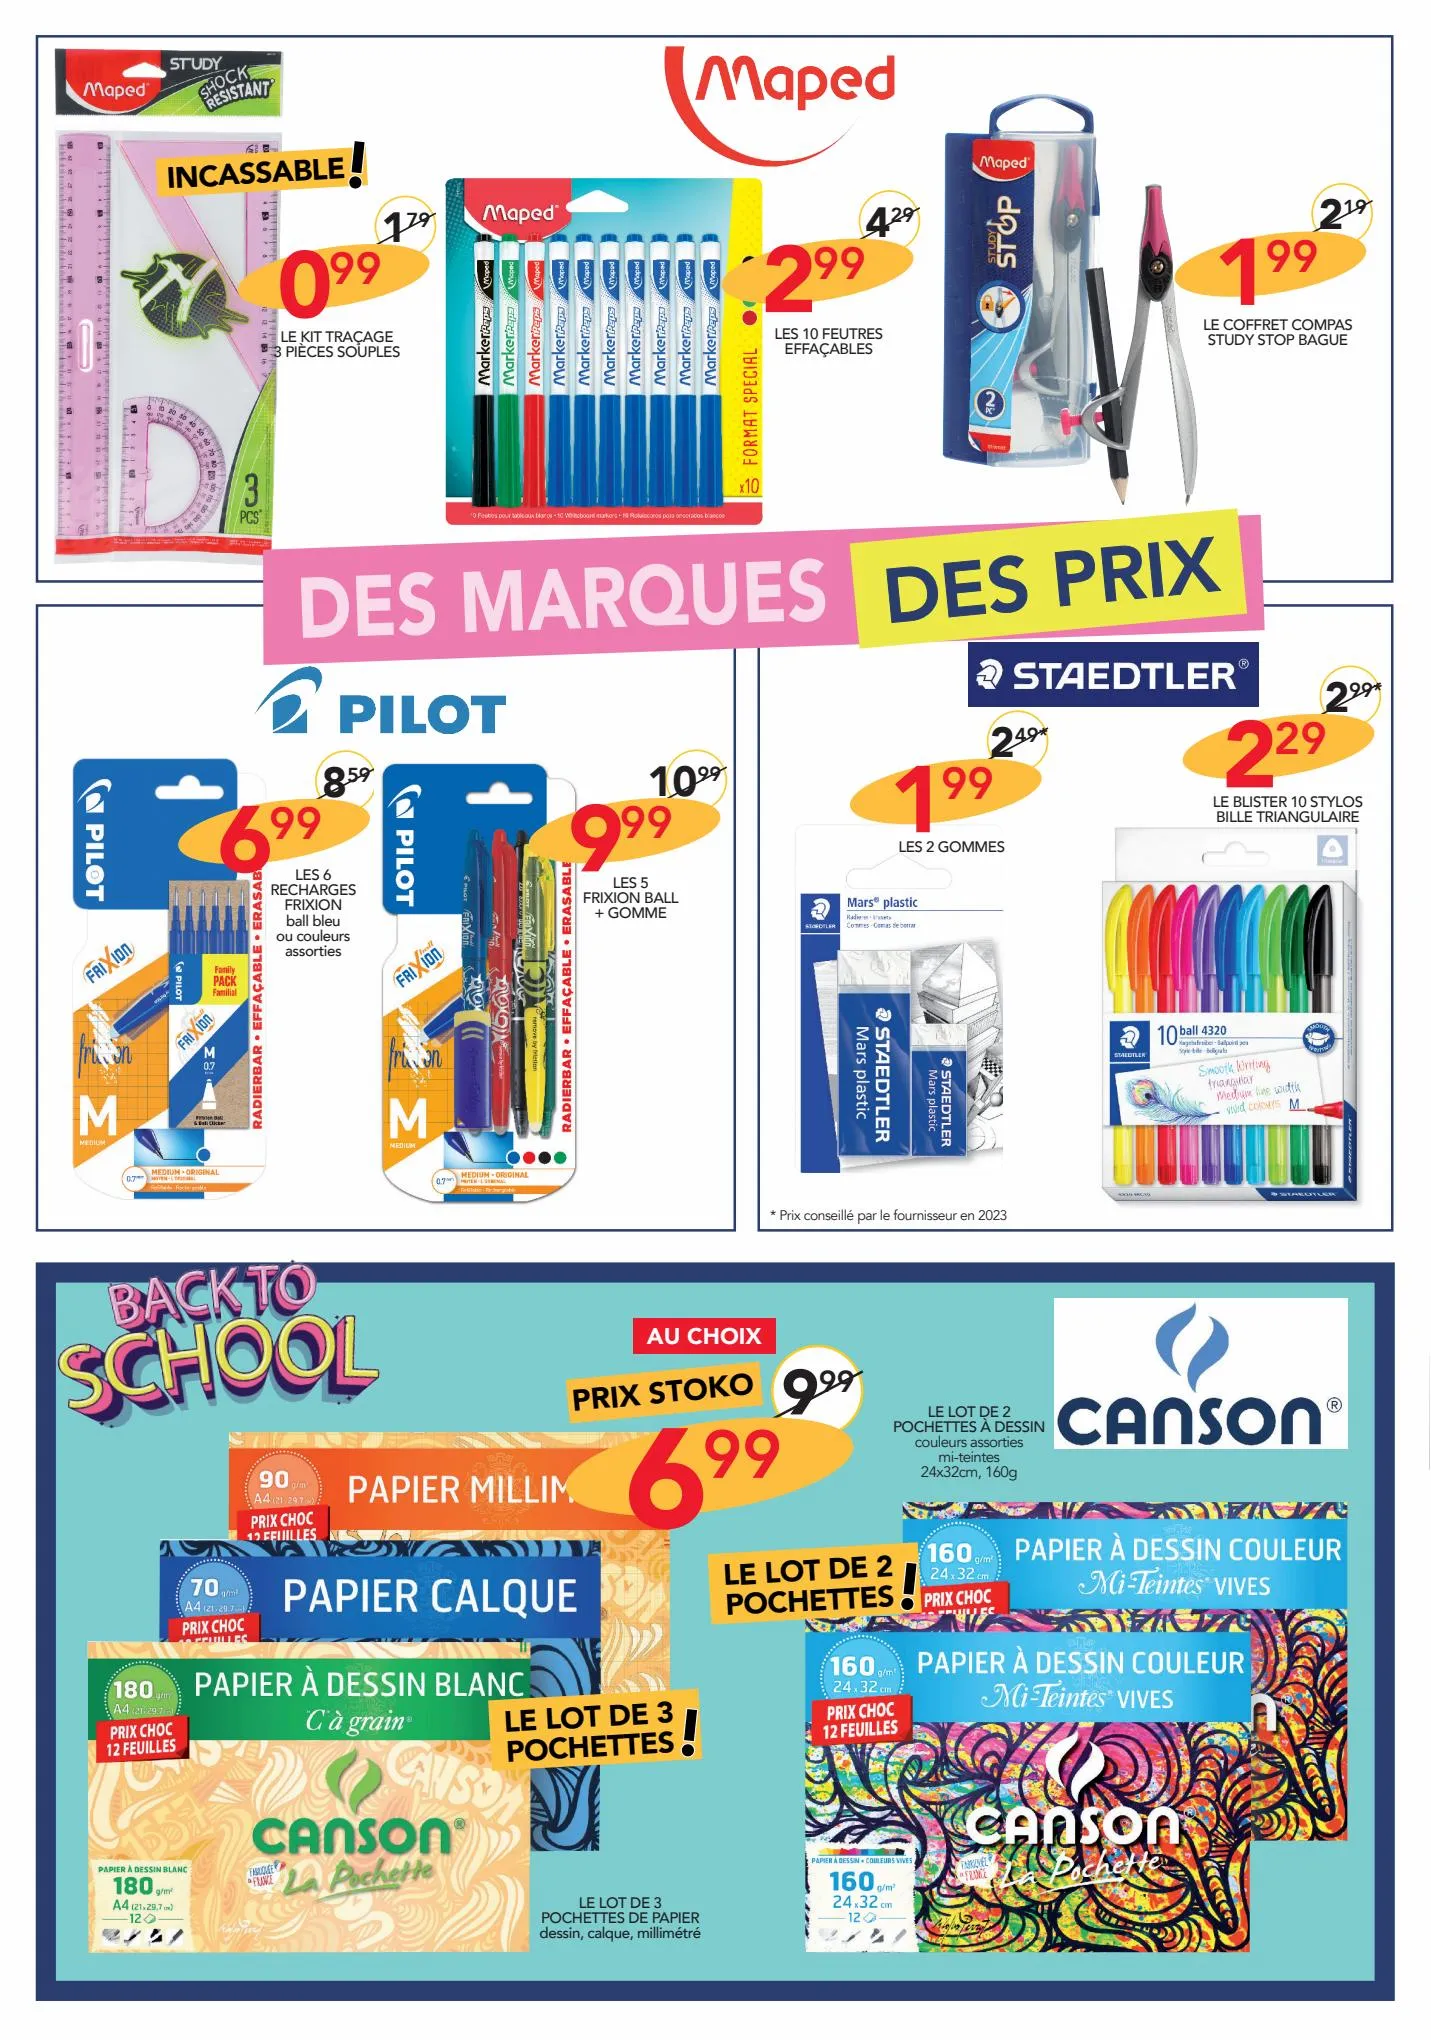 Catalogue BACK TO SCHOOL, page 00002